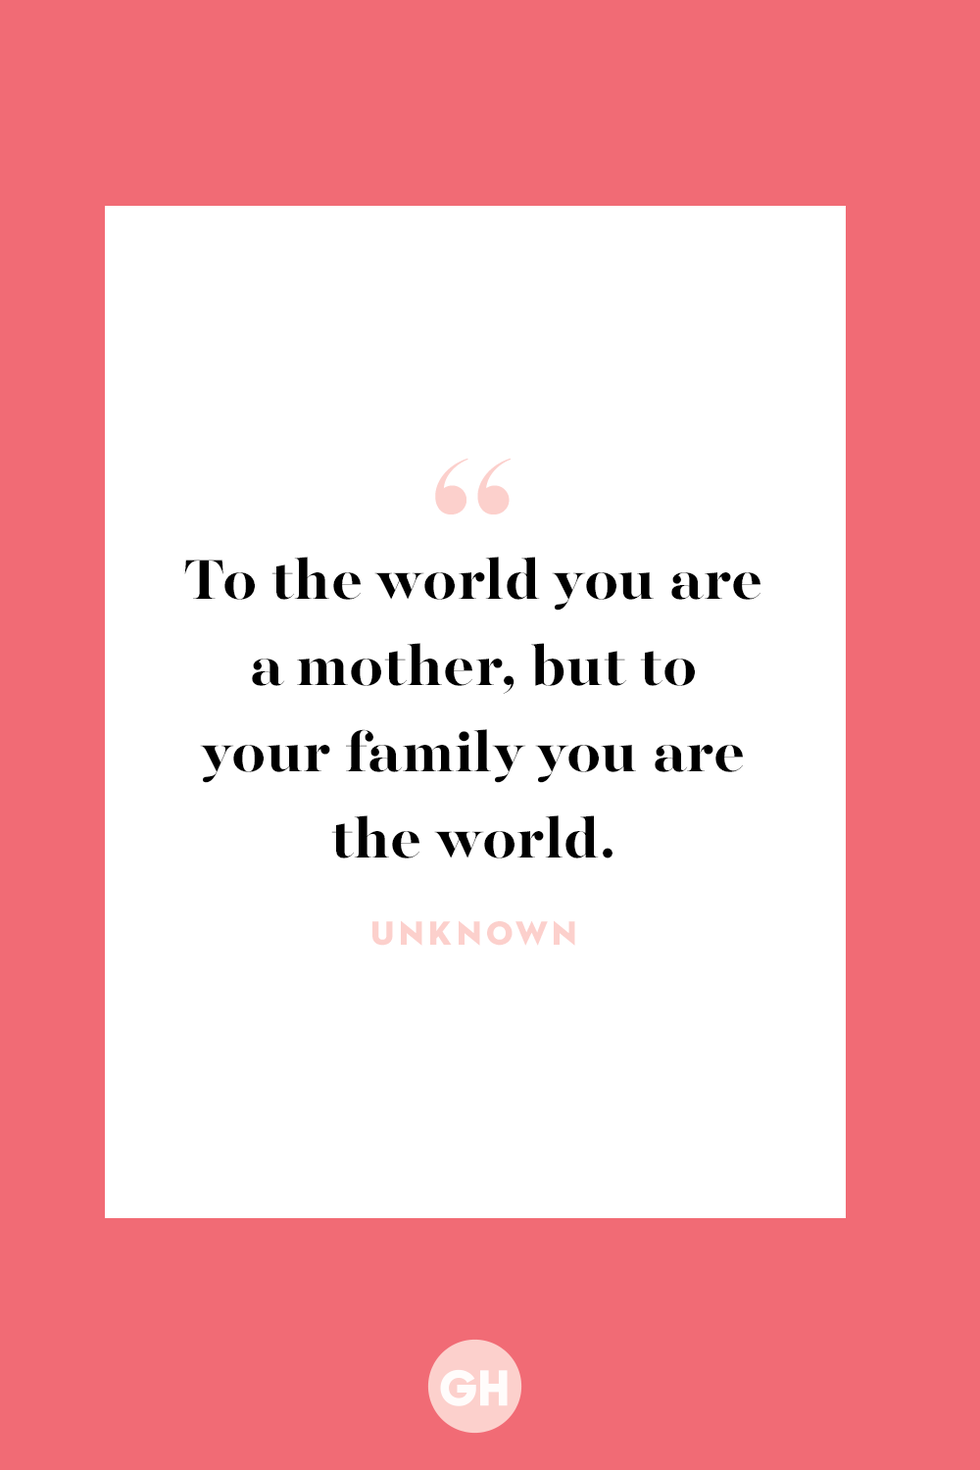 mother in law quotes to the world you are a mother, but to your family you are the world